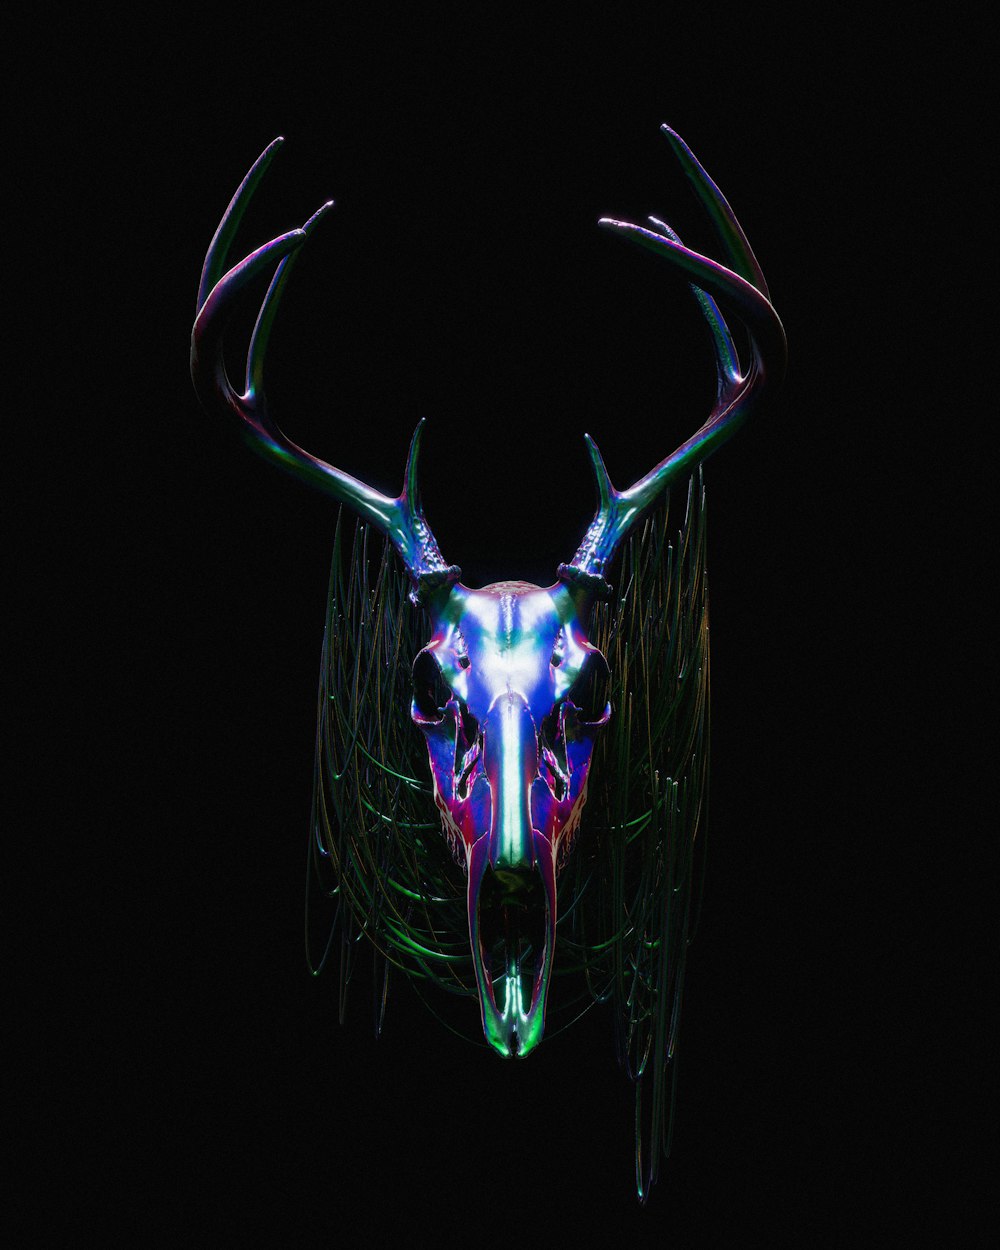 a deer's head with glowing antlers on a black background